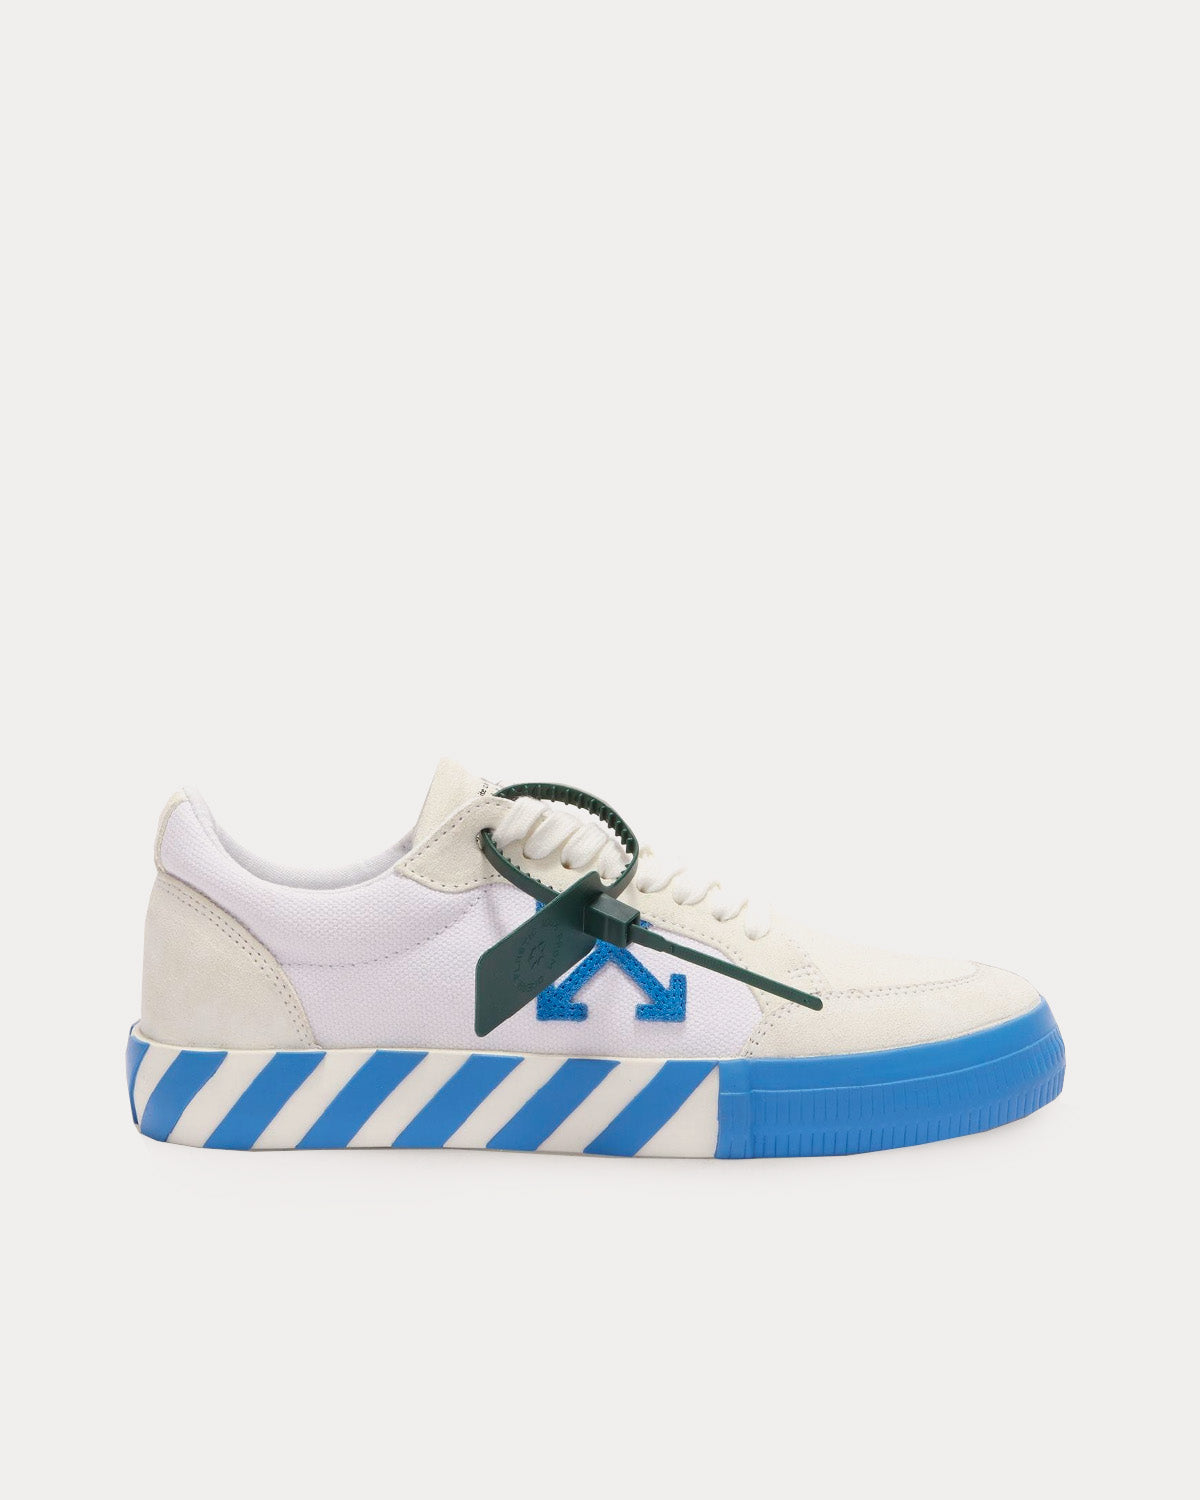 præst Blossom teleskop Off-White Low Vulcanized Suede & Canvas White / Blue Low Top Sneakers -  Sneak in Peace